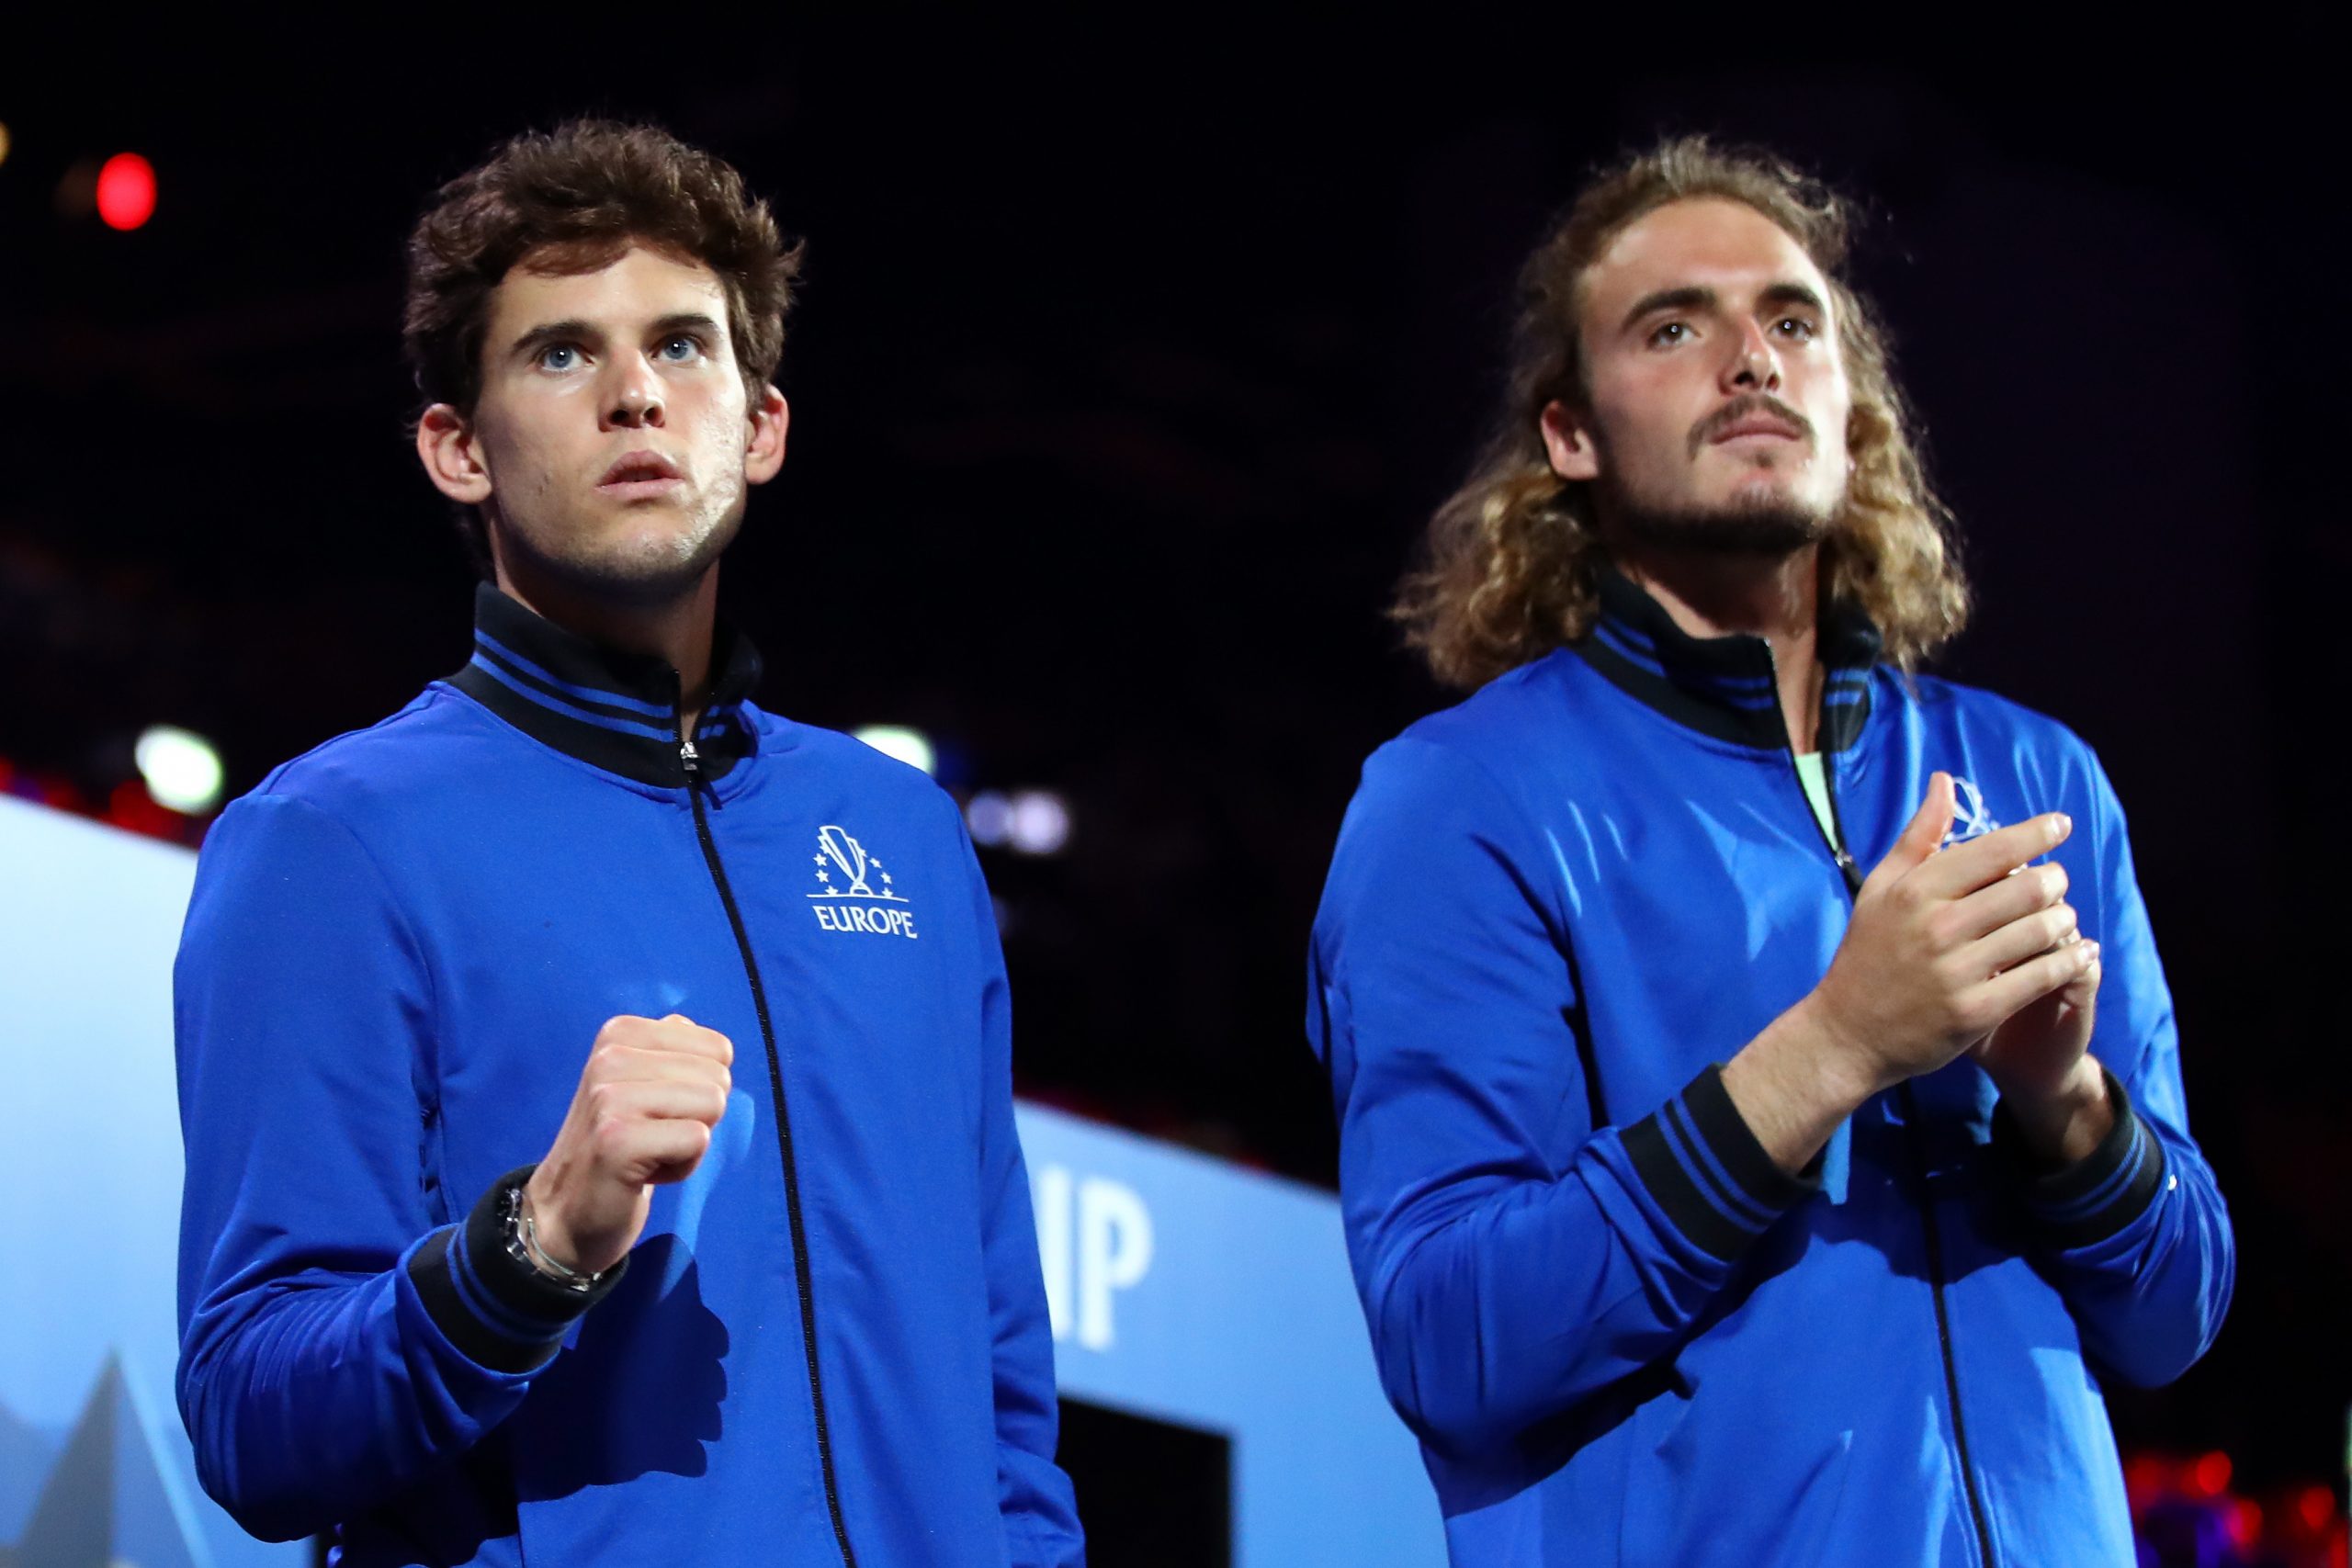 Dominic Thiem and Stefanos Tsitsipas could meet in an exhibition match